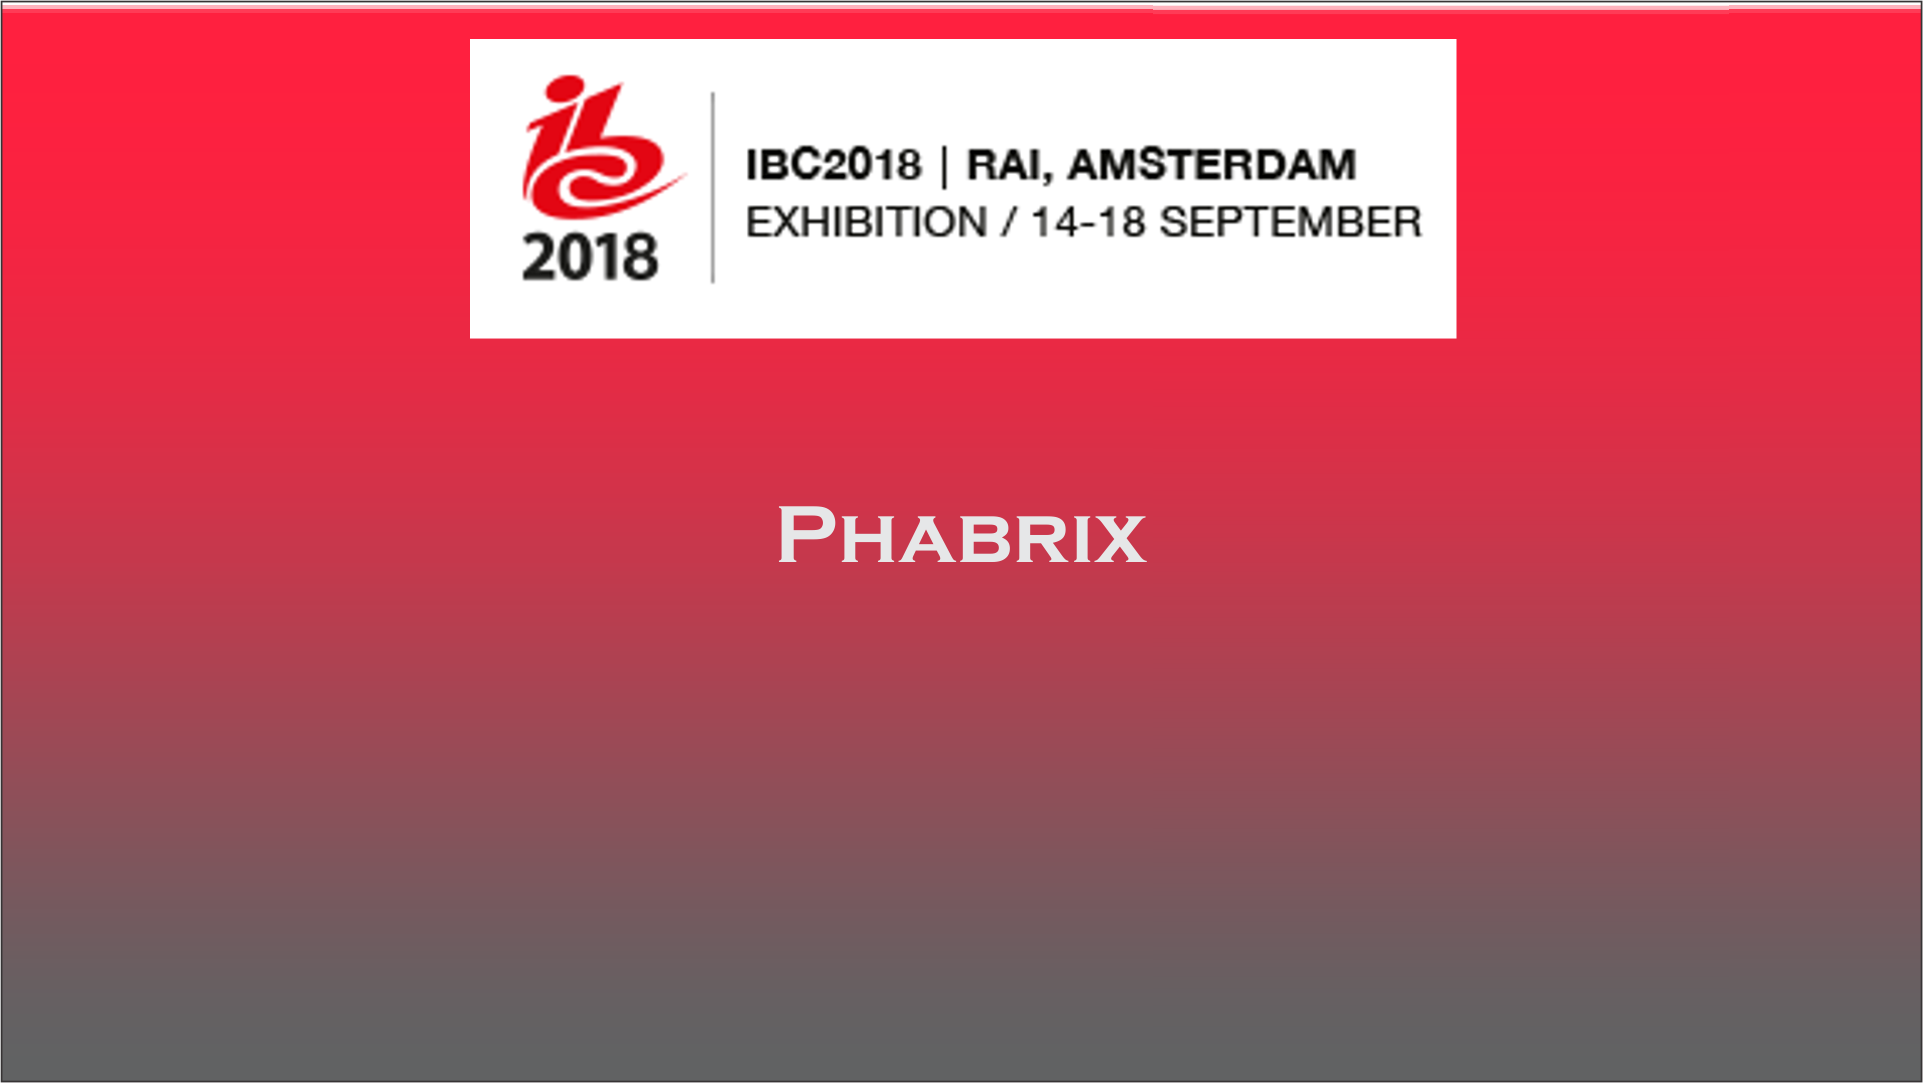 Phabrix showcases test and measurement solutions at IBC 2018